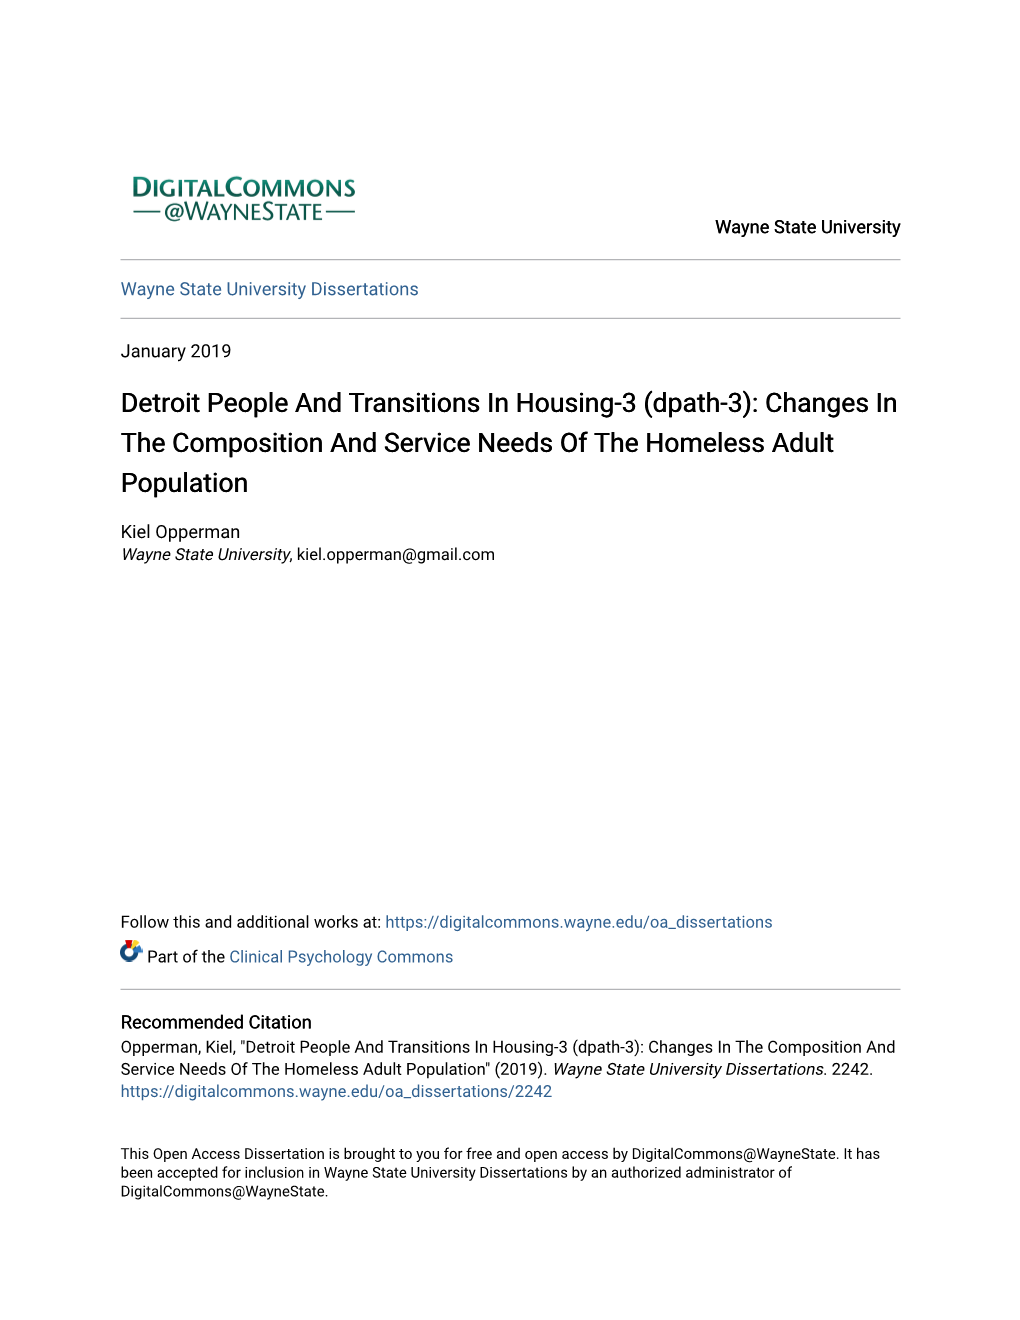 Dpath-3): Changes in the Composition and Service Needs of the Homeless Adult Population